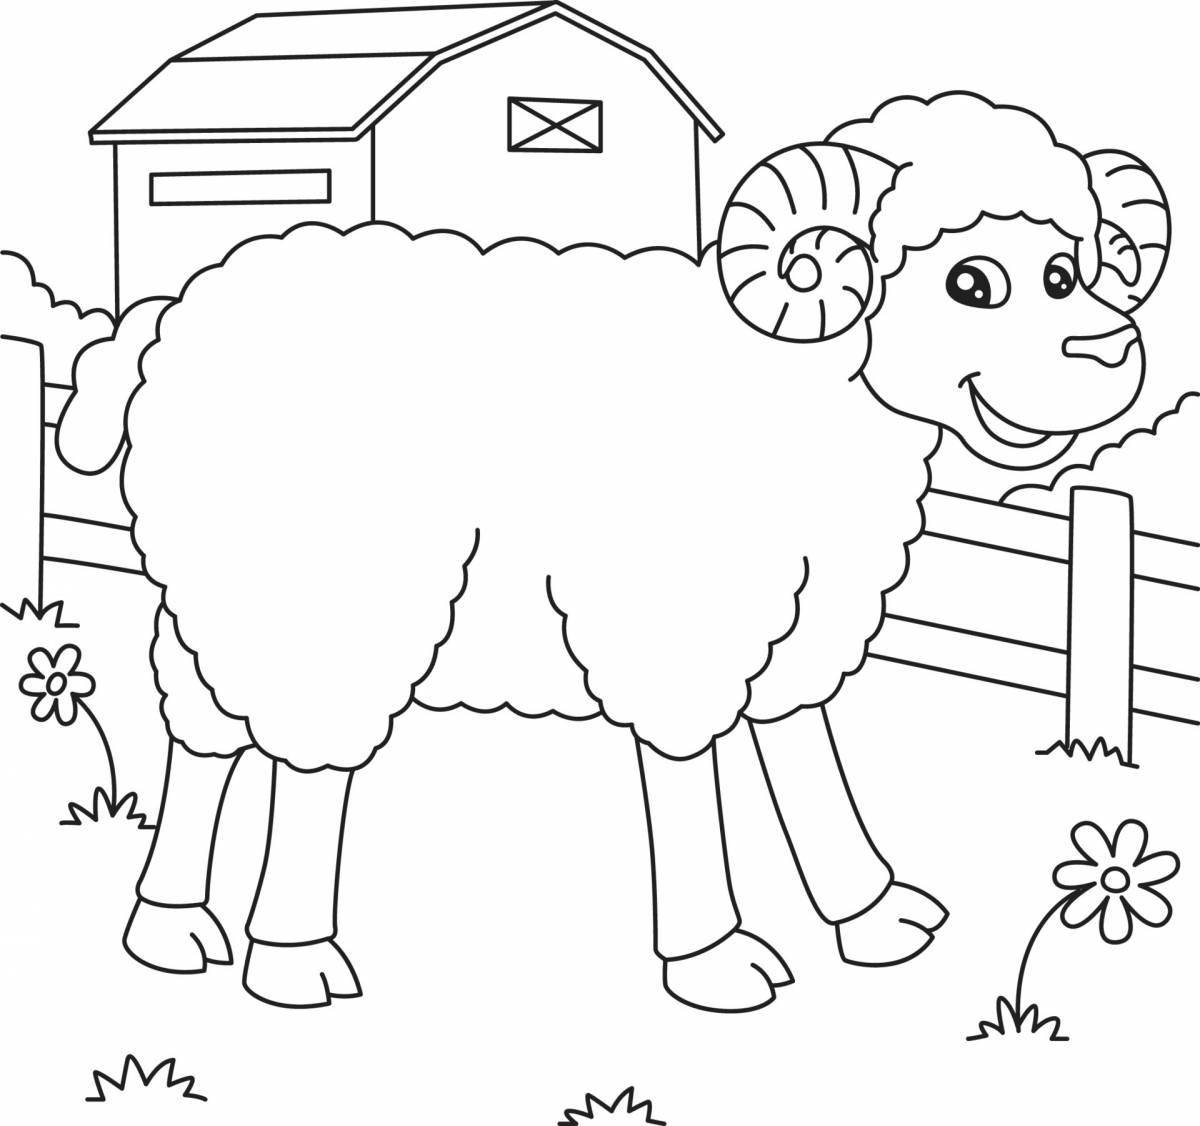 Adorable Sheep coloring book for kids 2-3 years old